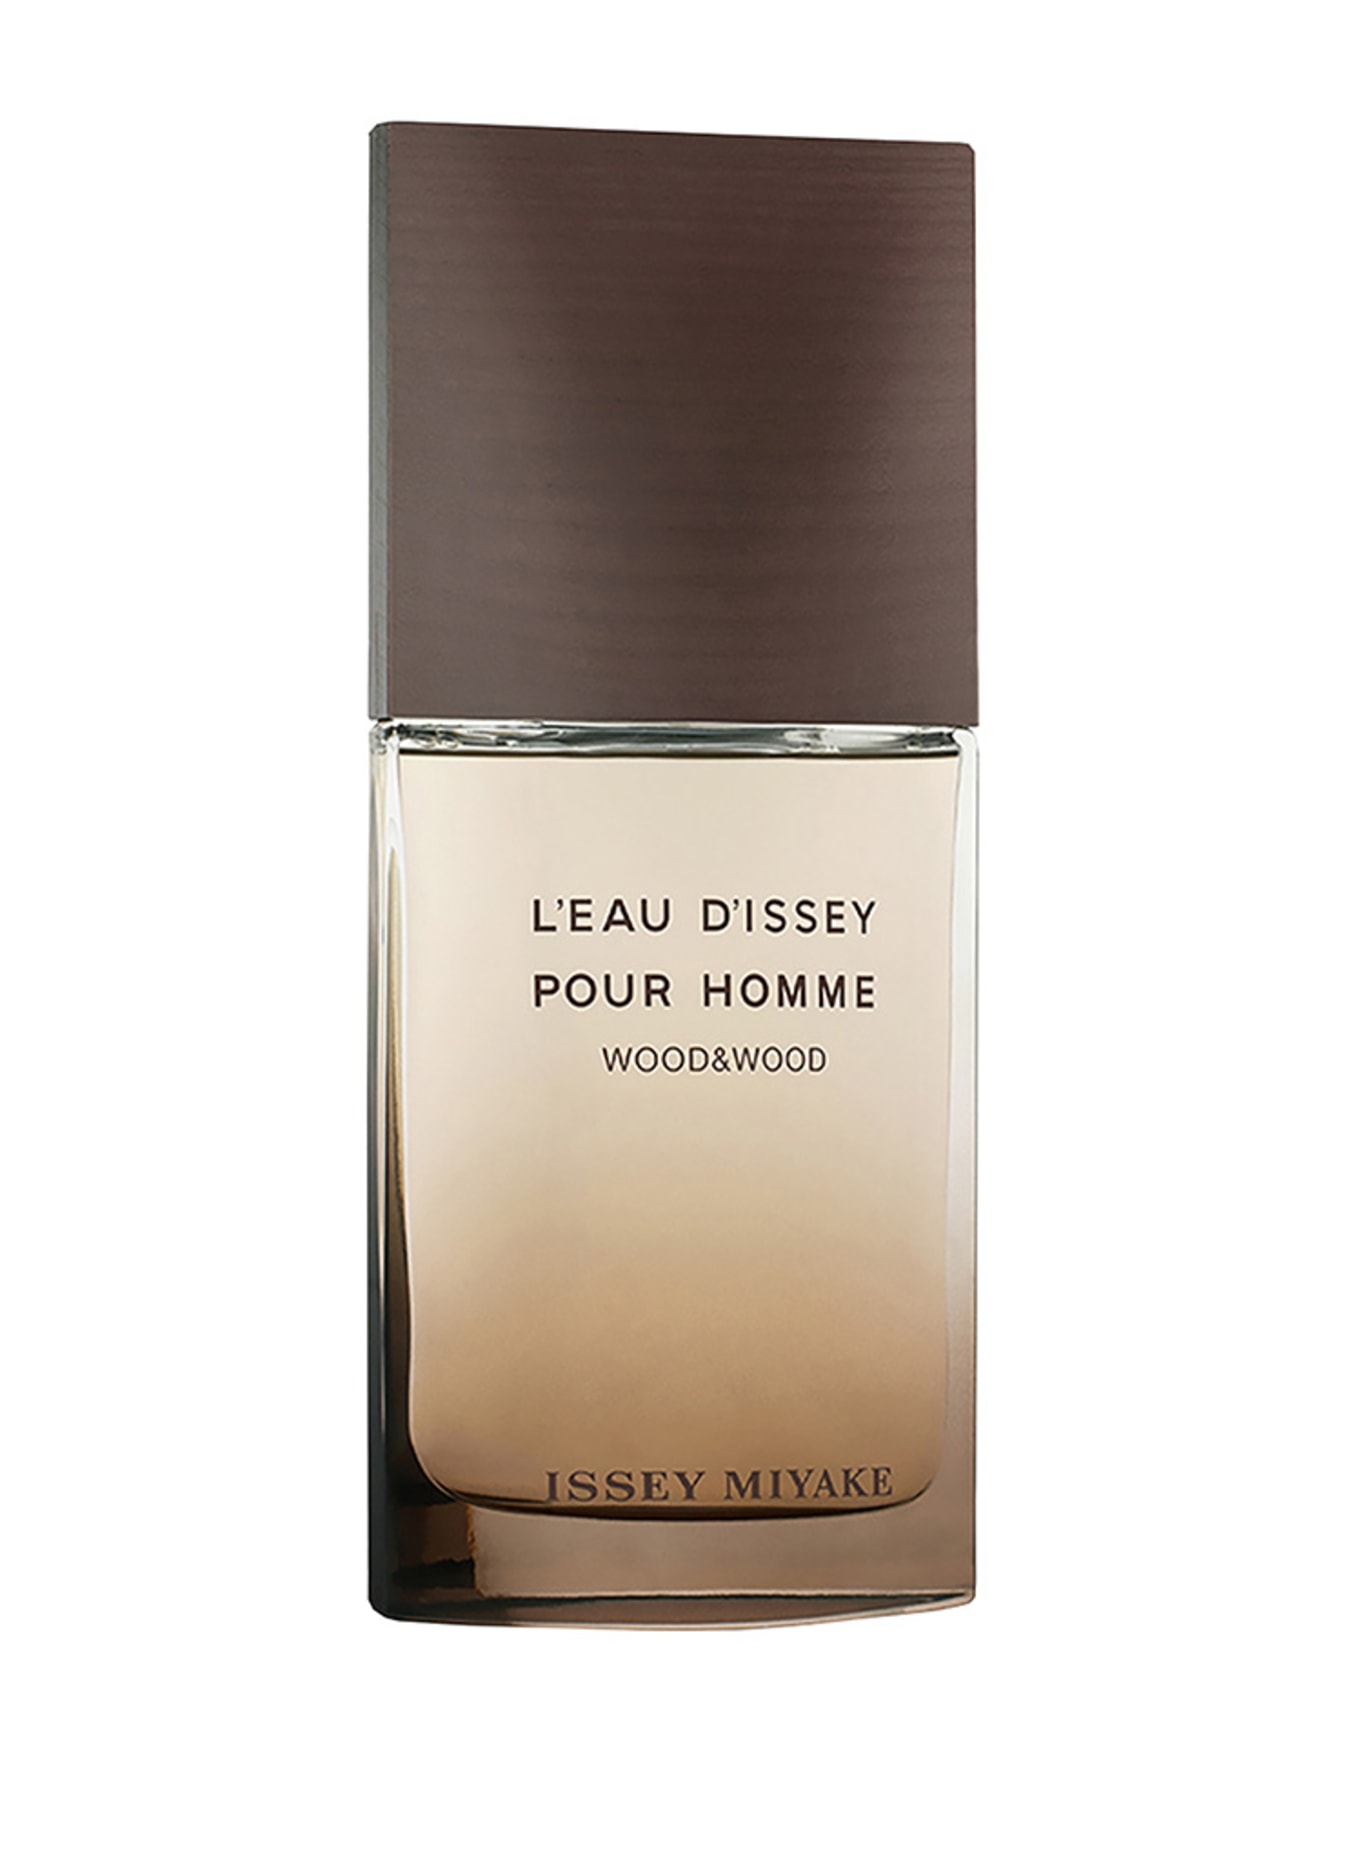 ISSEY MIYAKE L'EAU D'ISSEY POUR HOMME WOOD&WOOD (Bild 1)